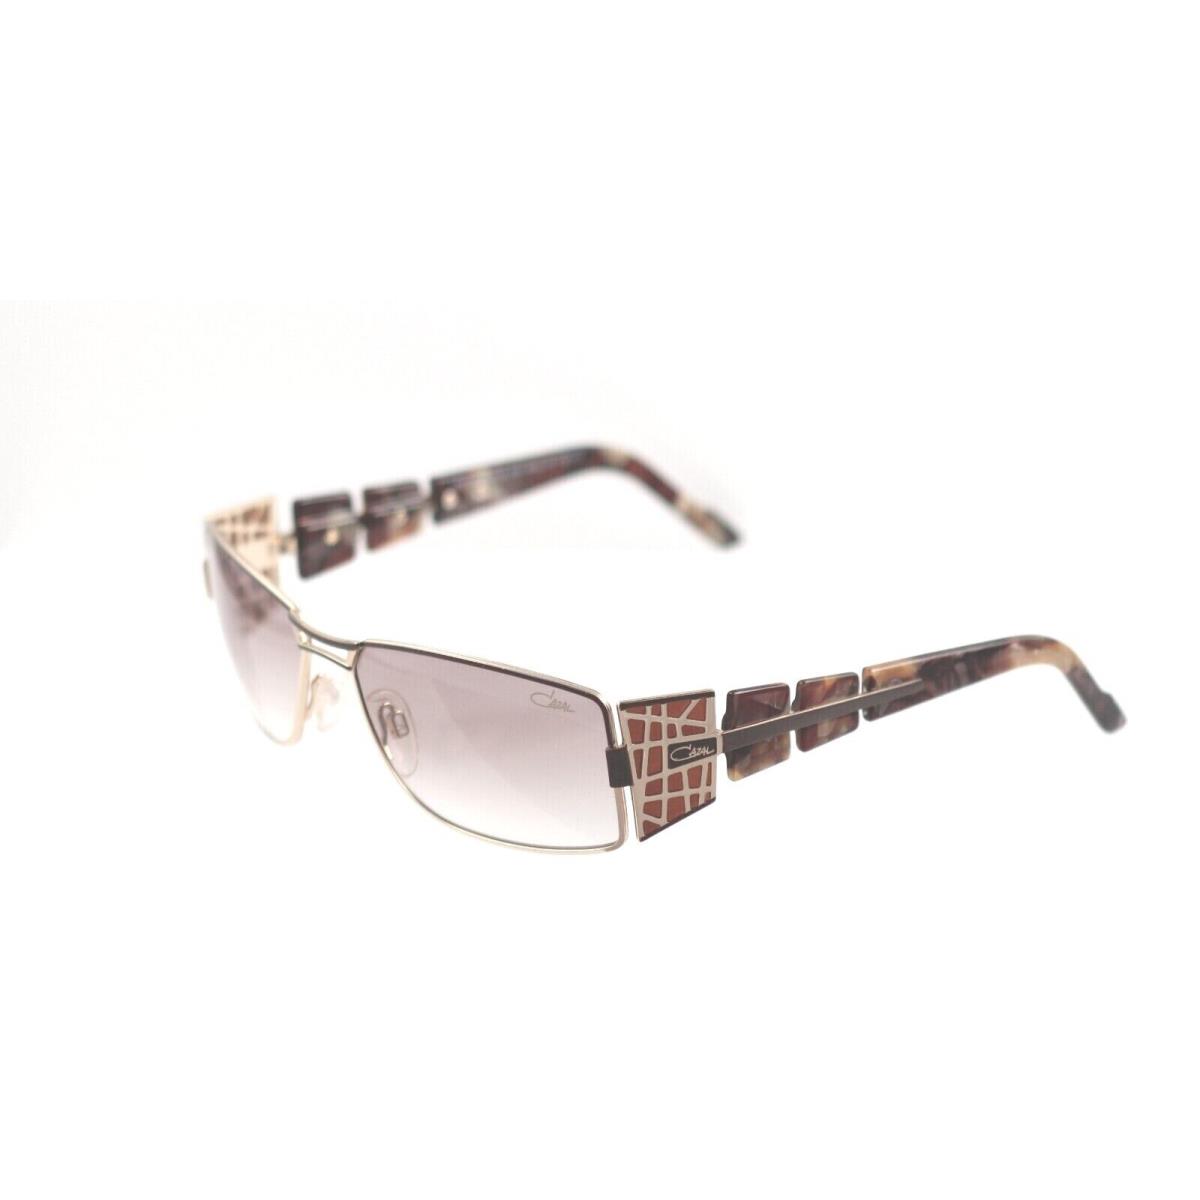 Cazal sunglasses  - Brown Gold , Brown Gold Frame, Brown Lens 0